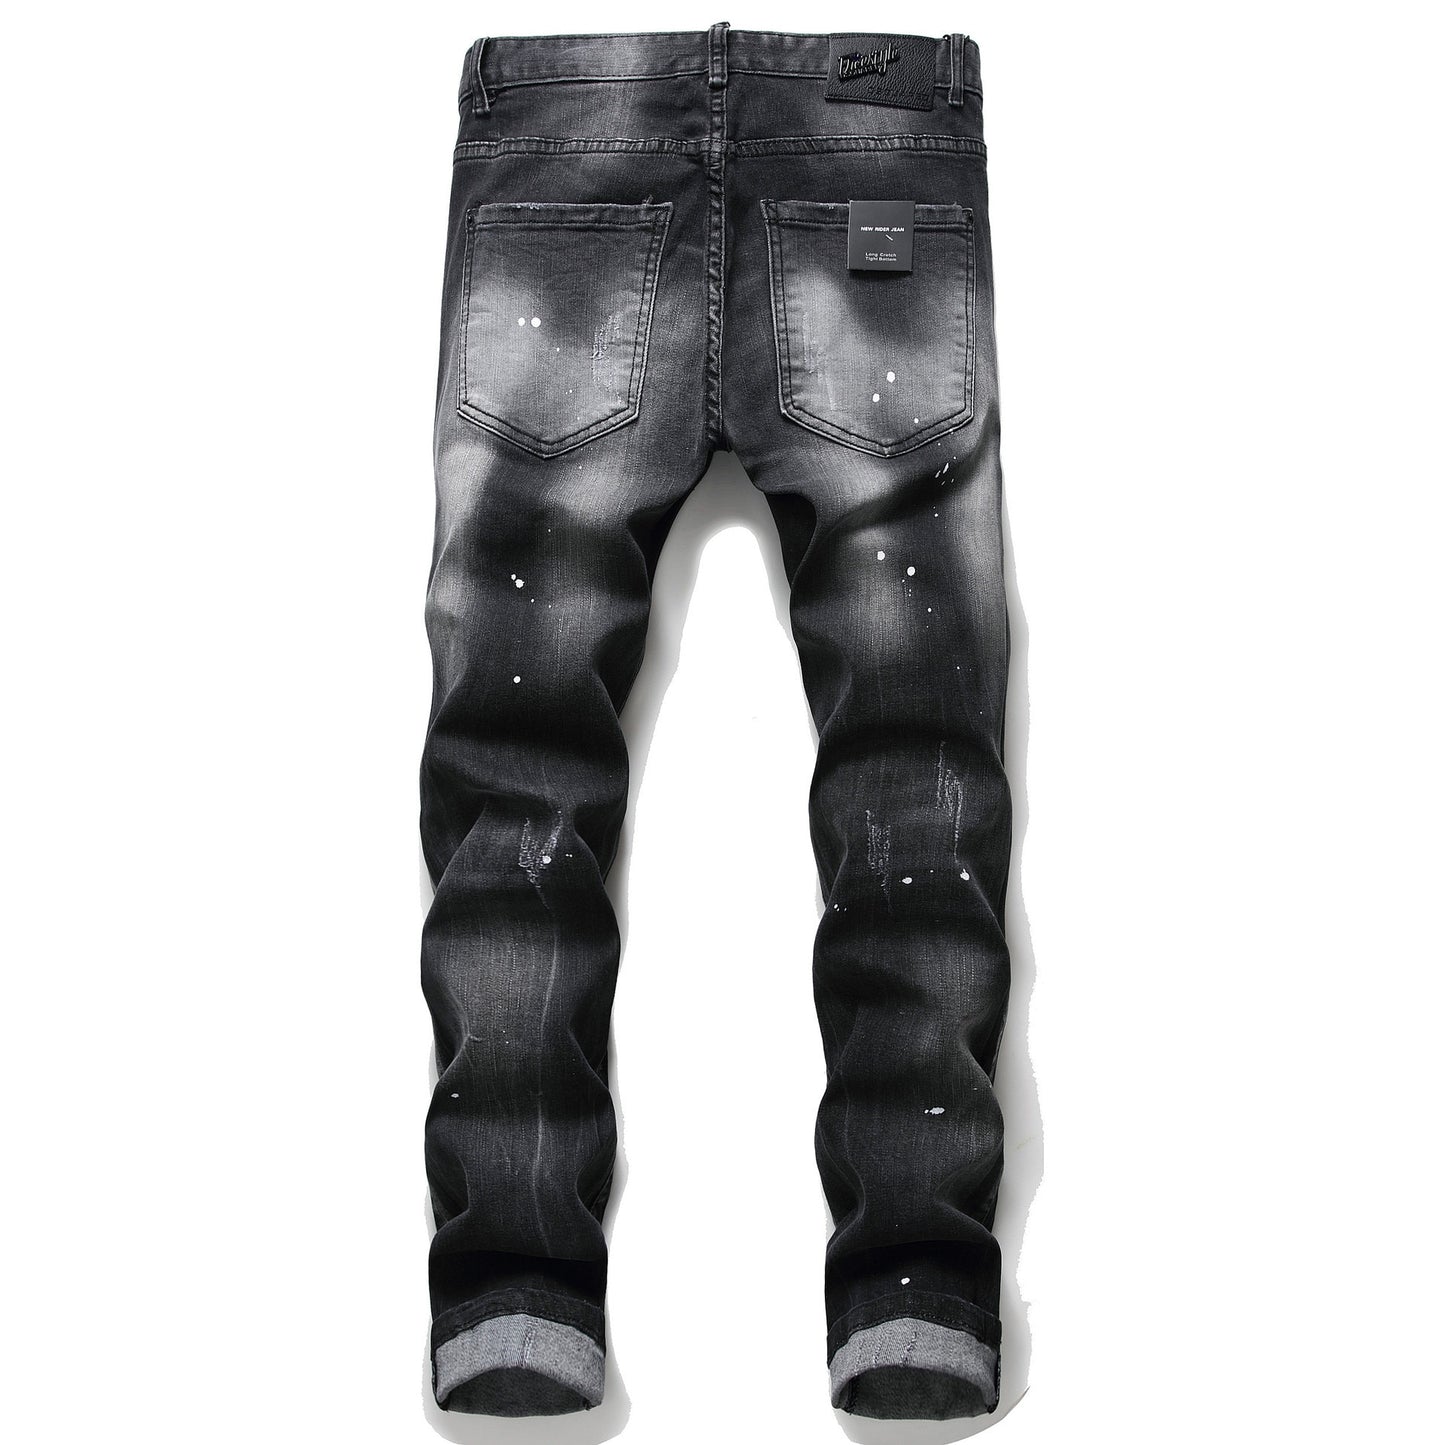 Starry Nights Jeans